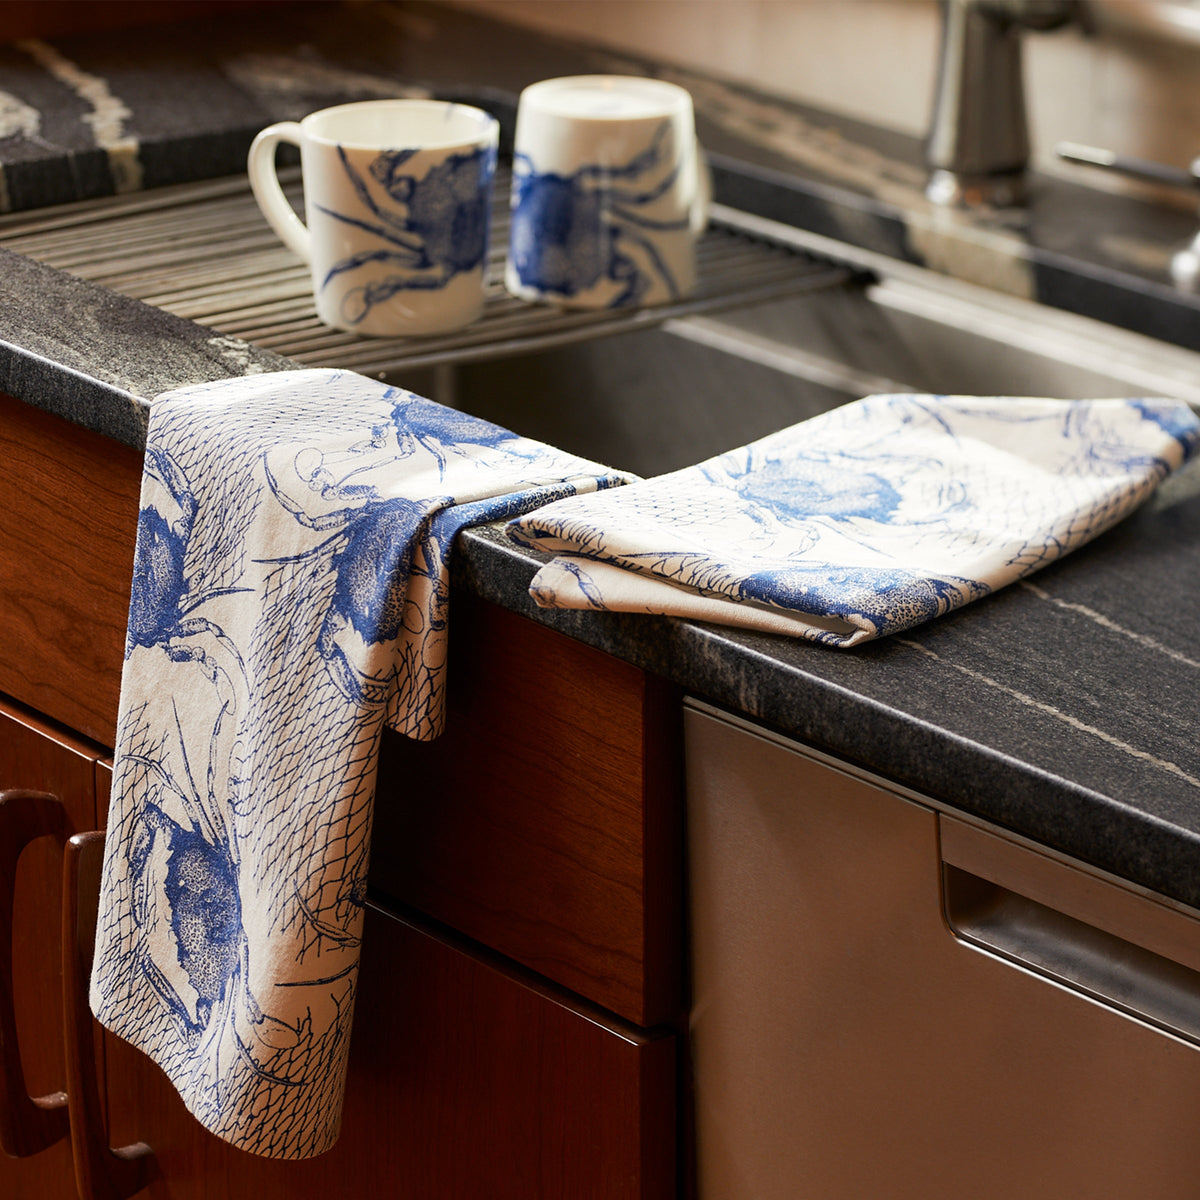 A kitchen sink with a Crabs &amp; Nets Kitchen Towels Set/2 by Caskata on it, adding a touch of seafaring whimsy.